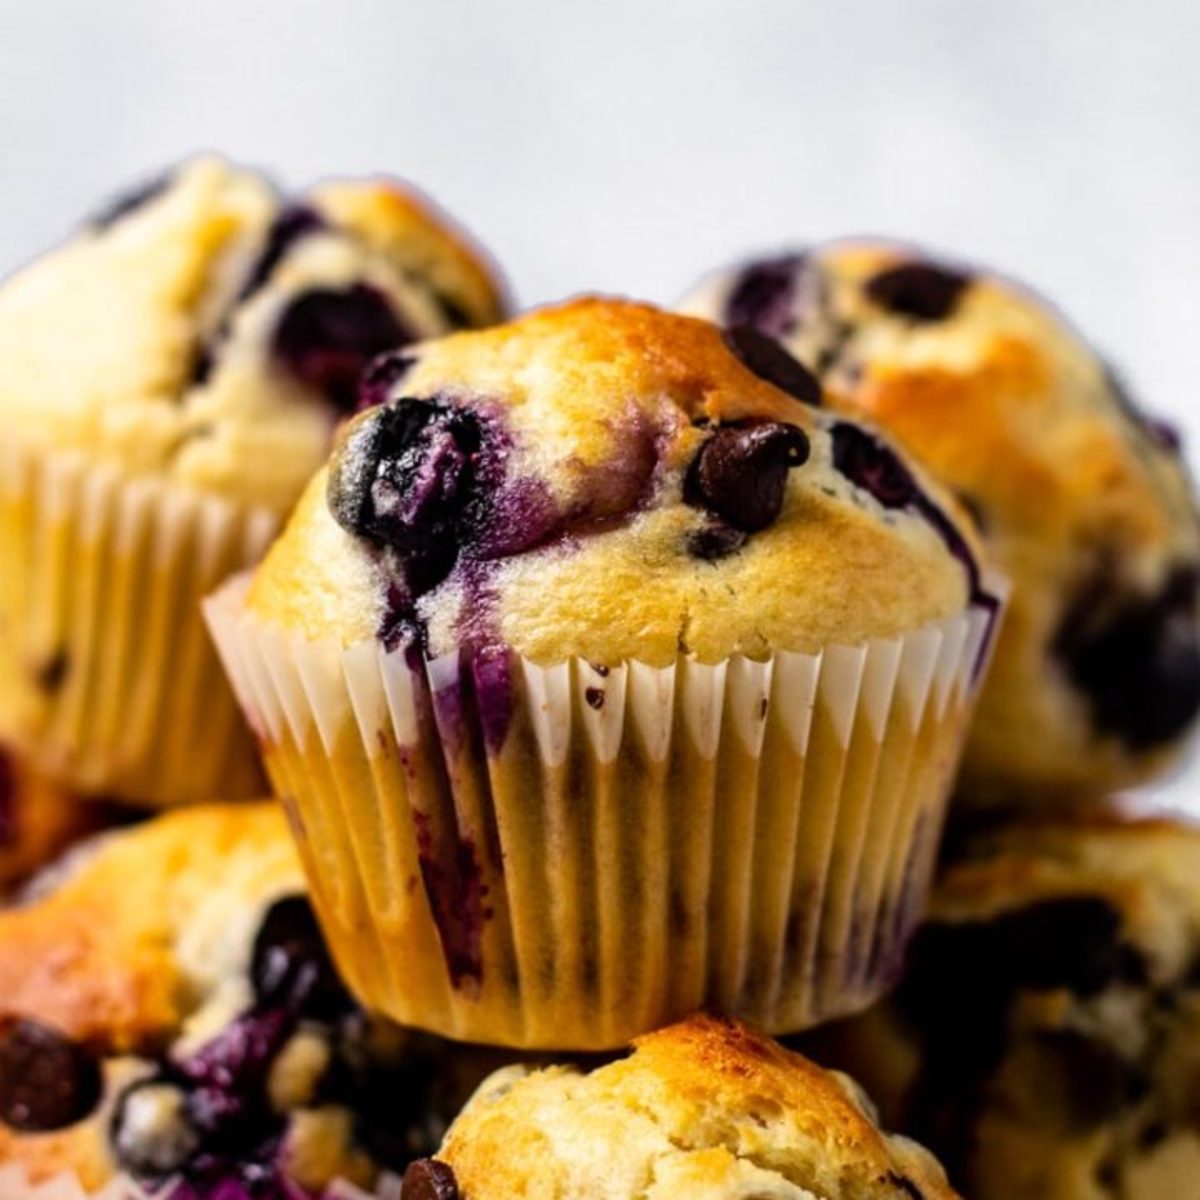 Make Healthy Blueberry Muffins Recipe - So Fluffy and Easy